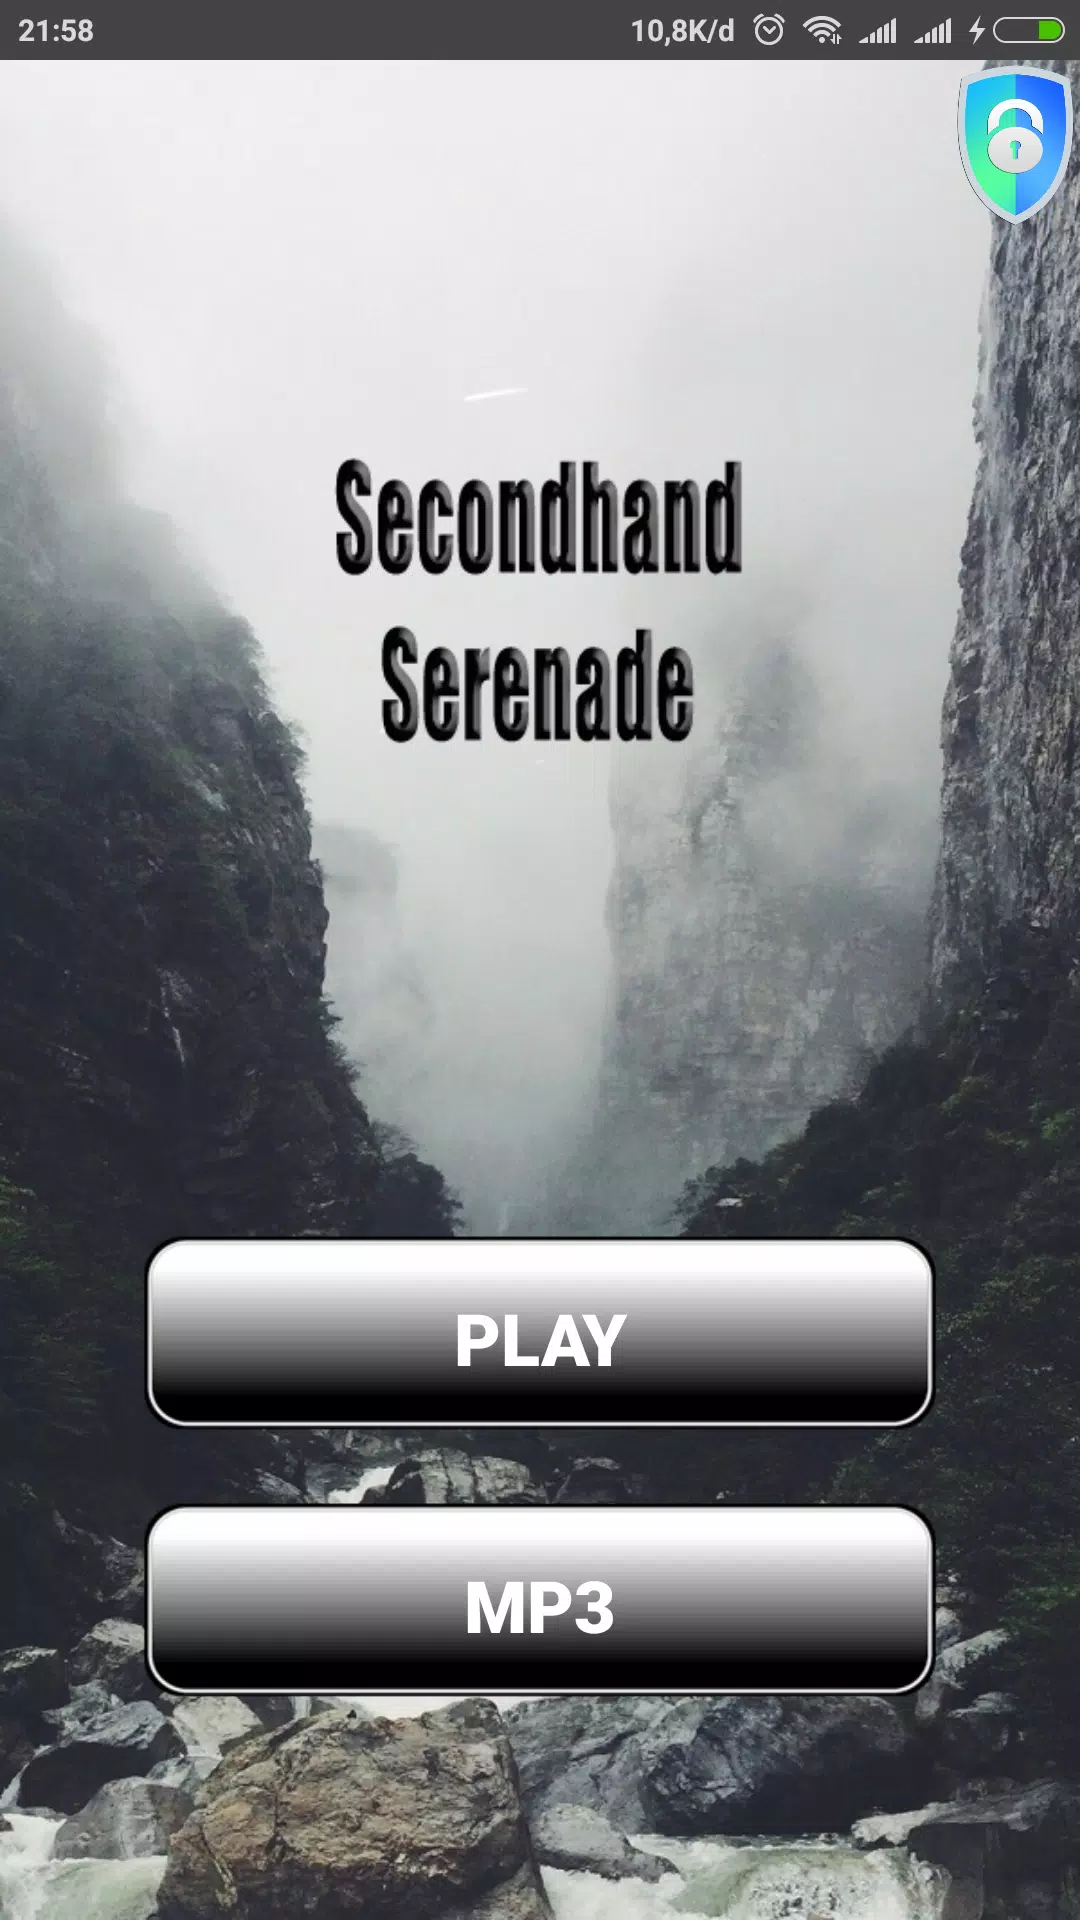 Secondhand Serenade for Android - APK Download